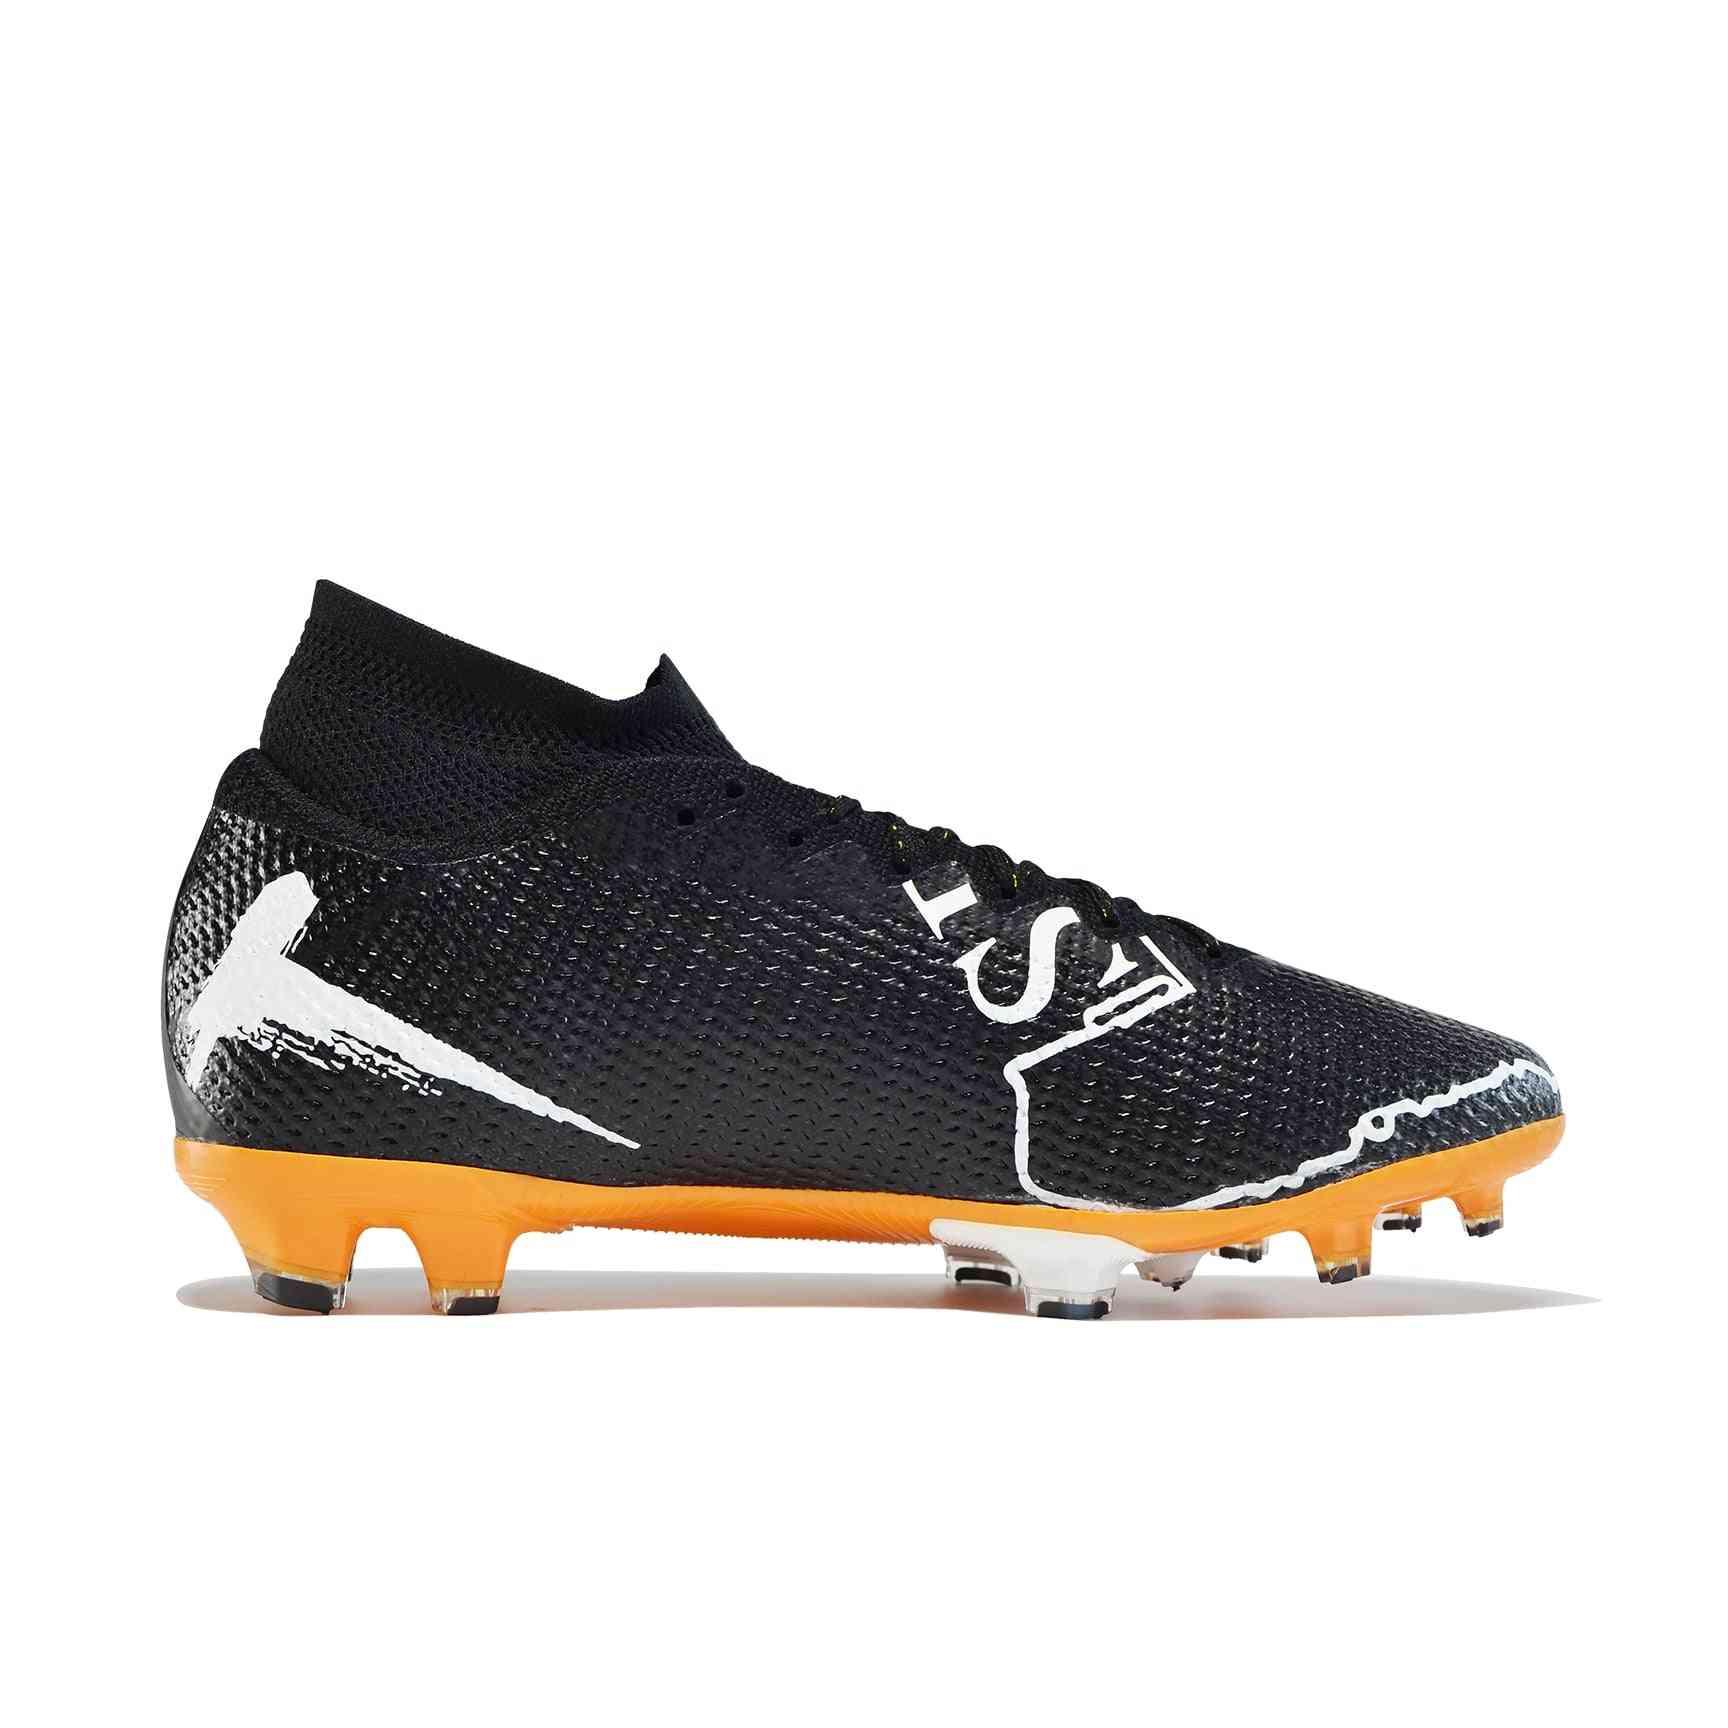 Football Boots, Training Professional Soccer Cleats High Ankle Sport Shoes